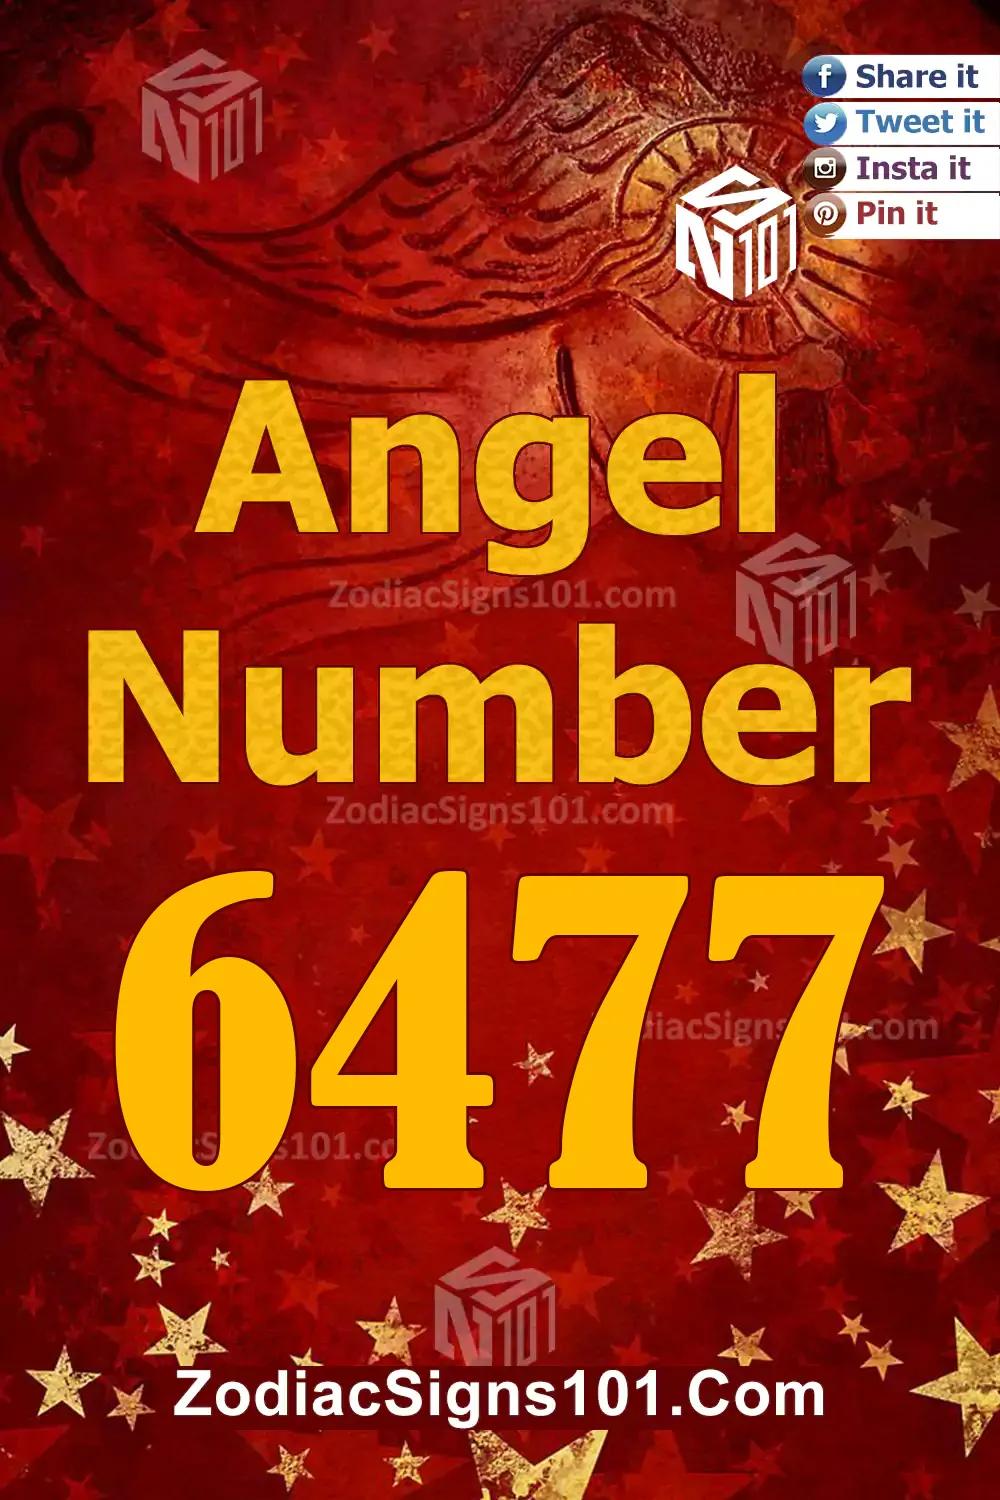 6477 Angel Number Meaning